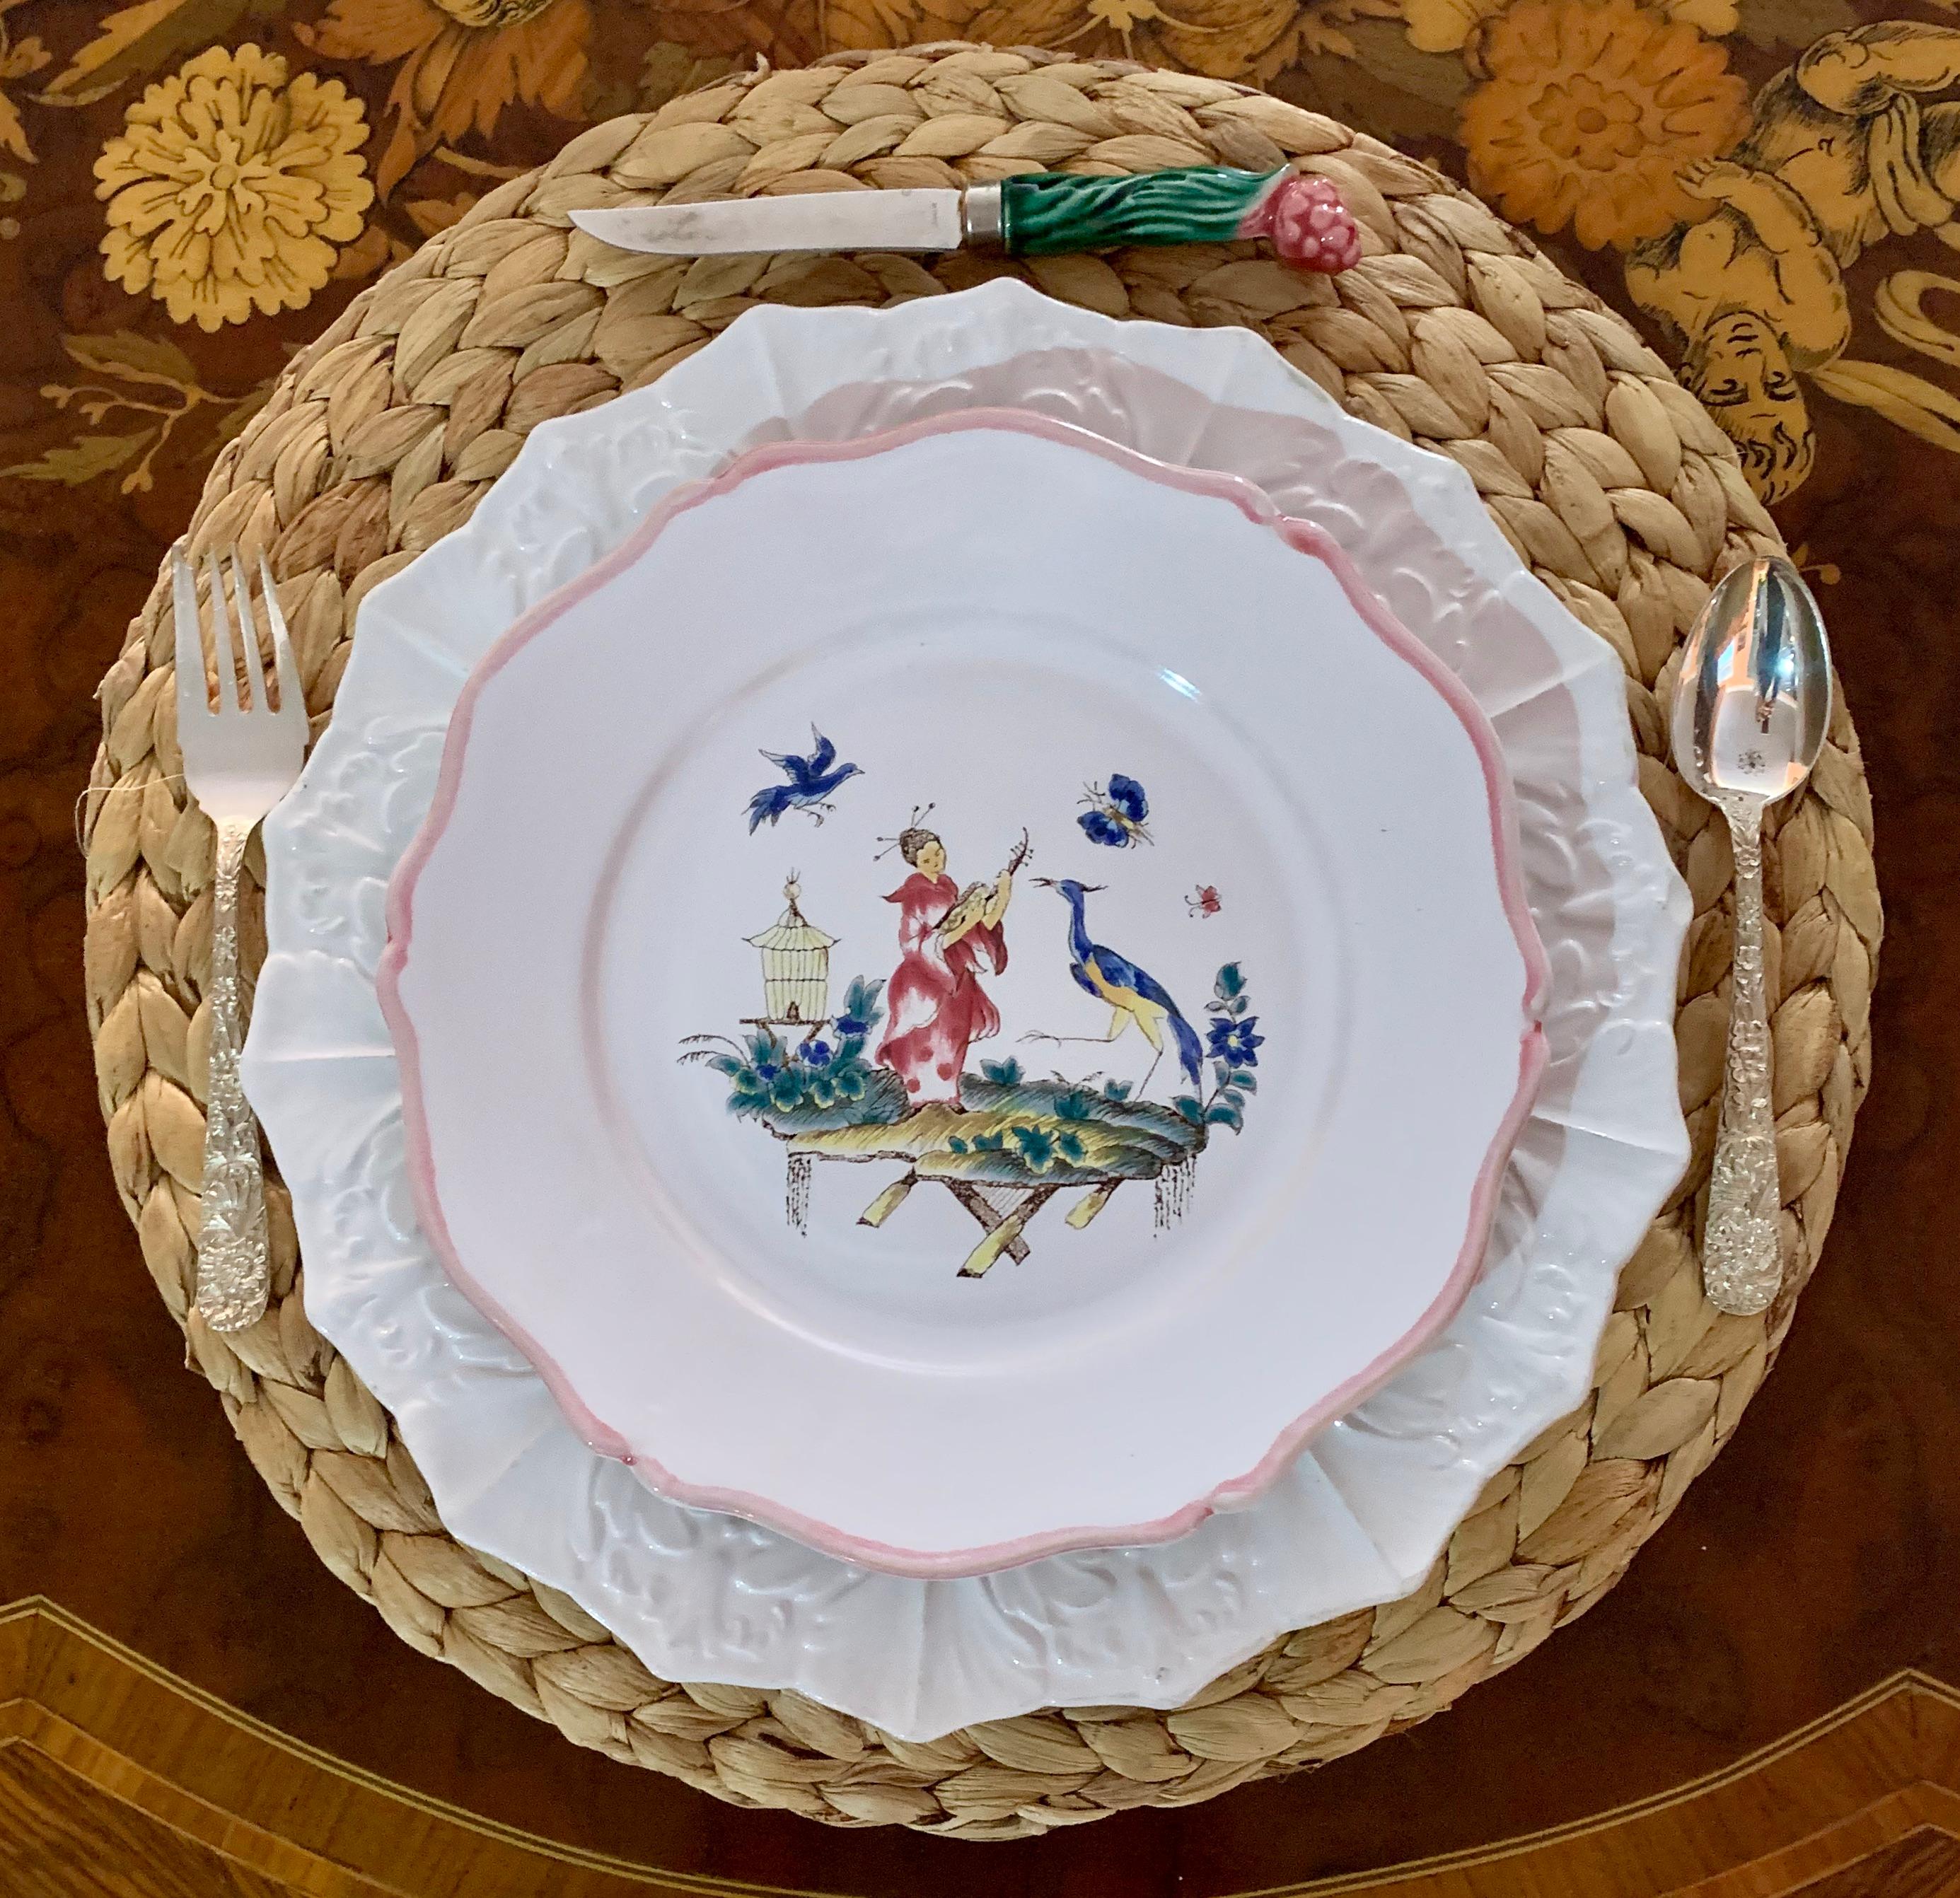 A set of twelve faïence plates in the chinoiserie style, circa early 1960s, by Pierre Motton in Gien, France.

A fine quality faience pottery, hand painted with five different scenes in a chinoiserie design produced for the retailer Tiffany & Co.